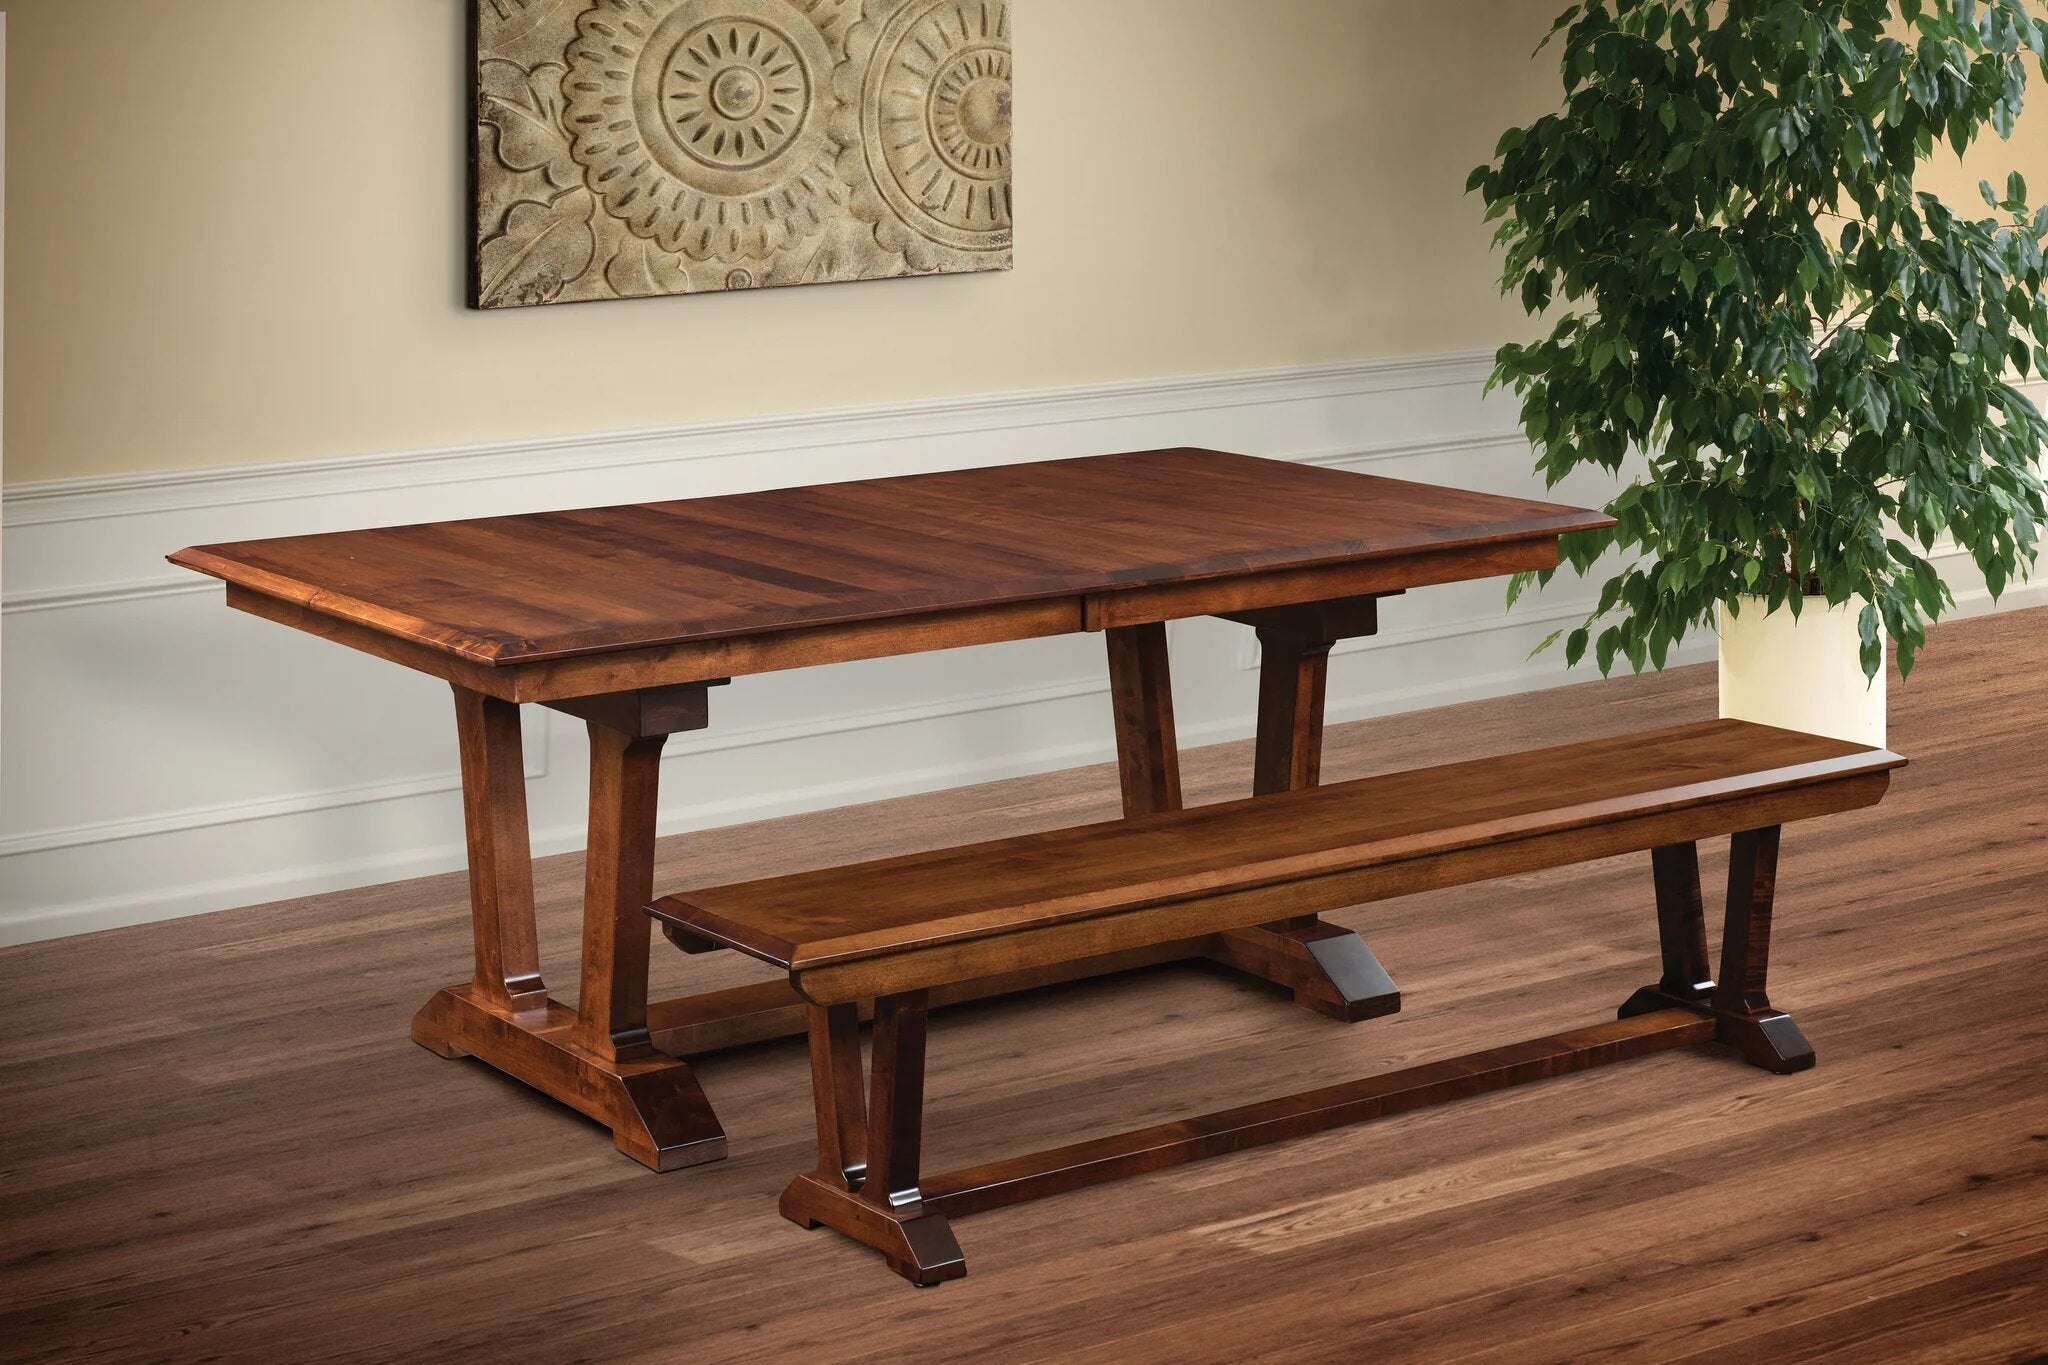 harper double pedestal table with bench in room setting